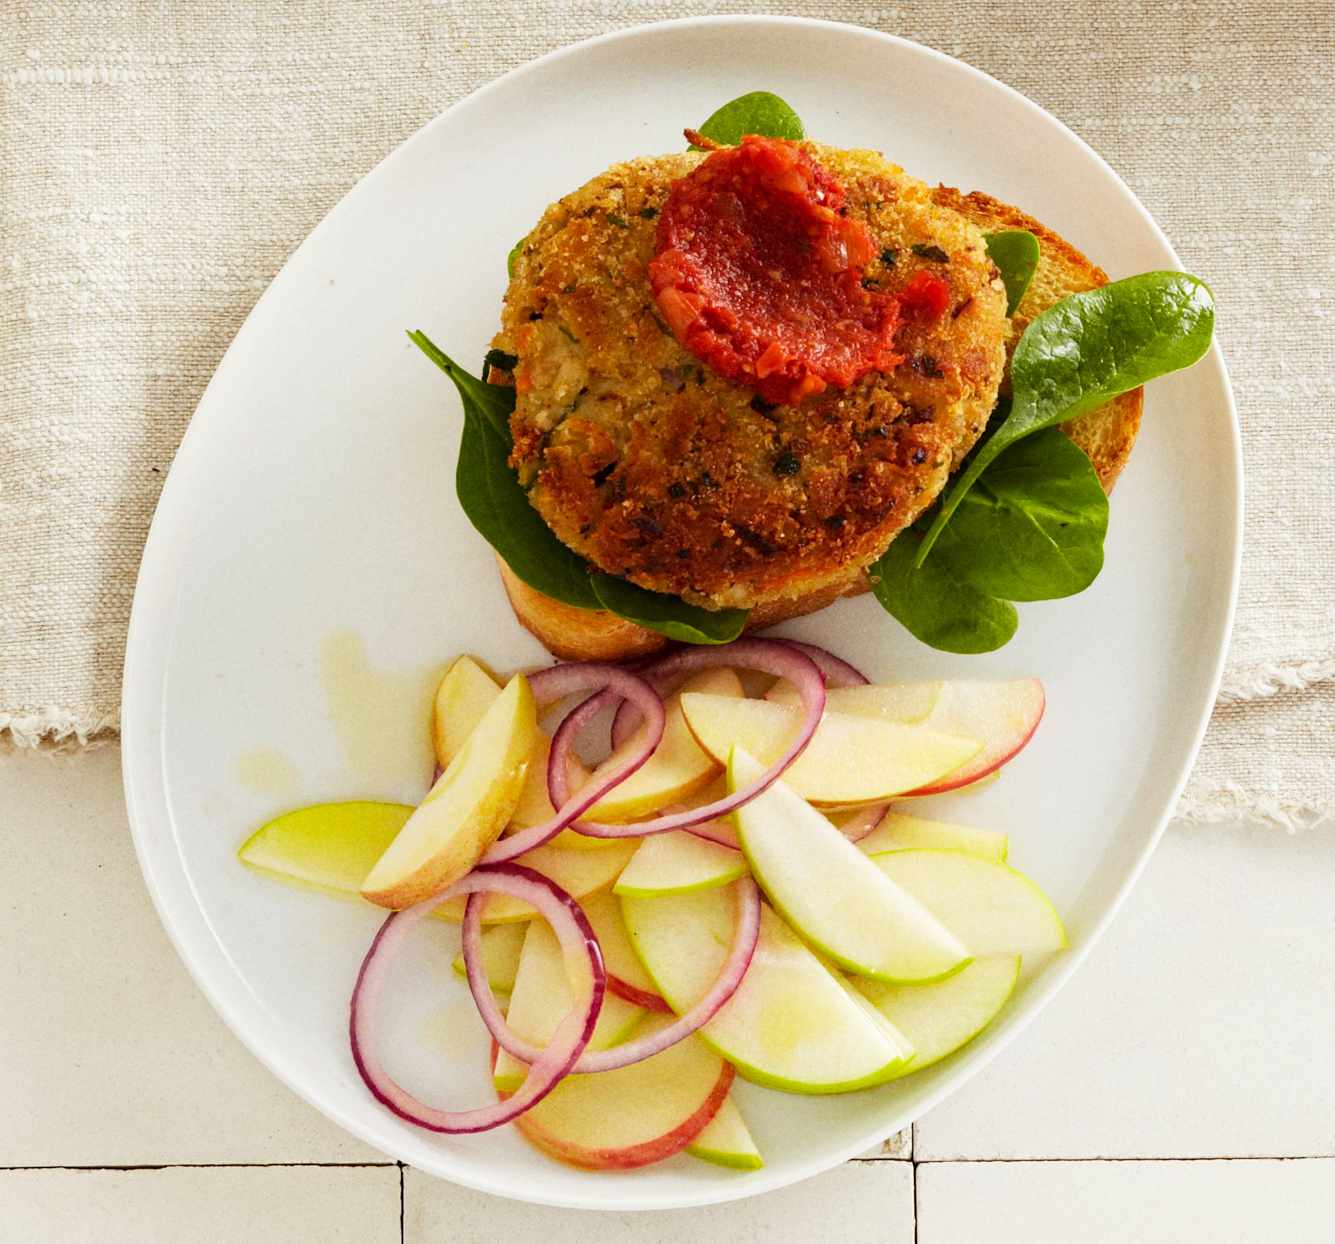 veggie burger with sliced apples and onions